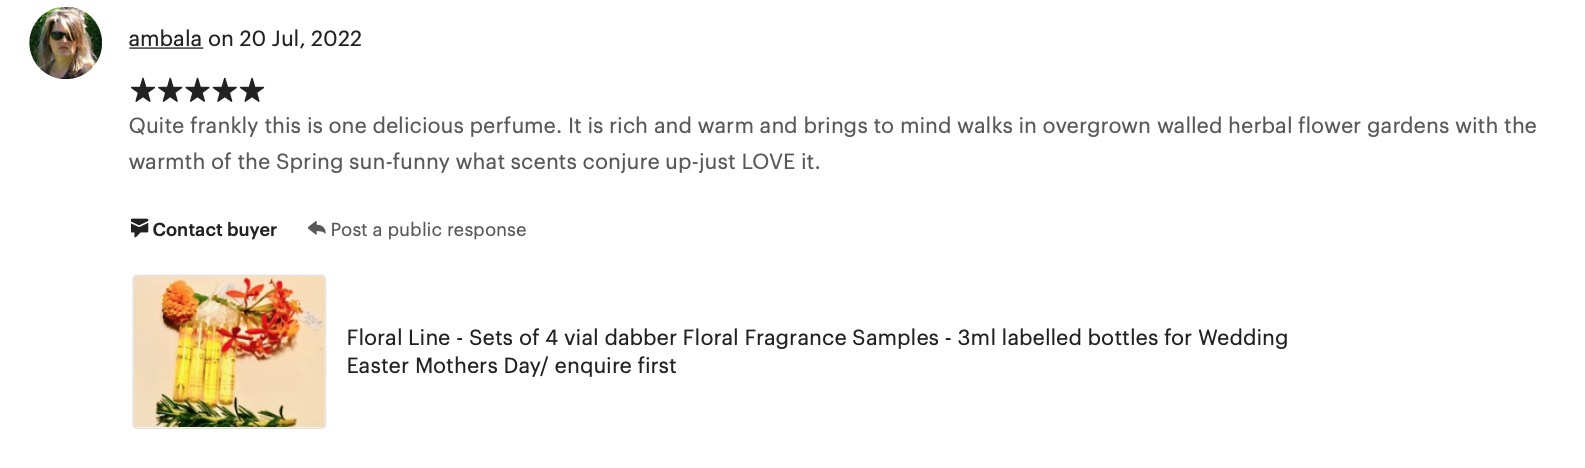 Ambala feedback about floral samples